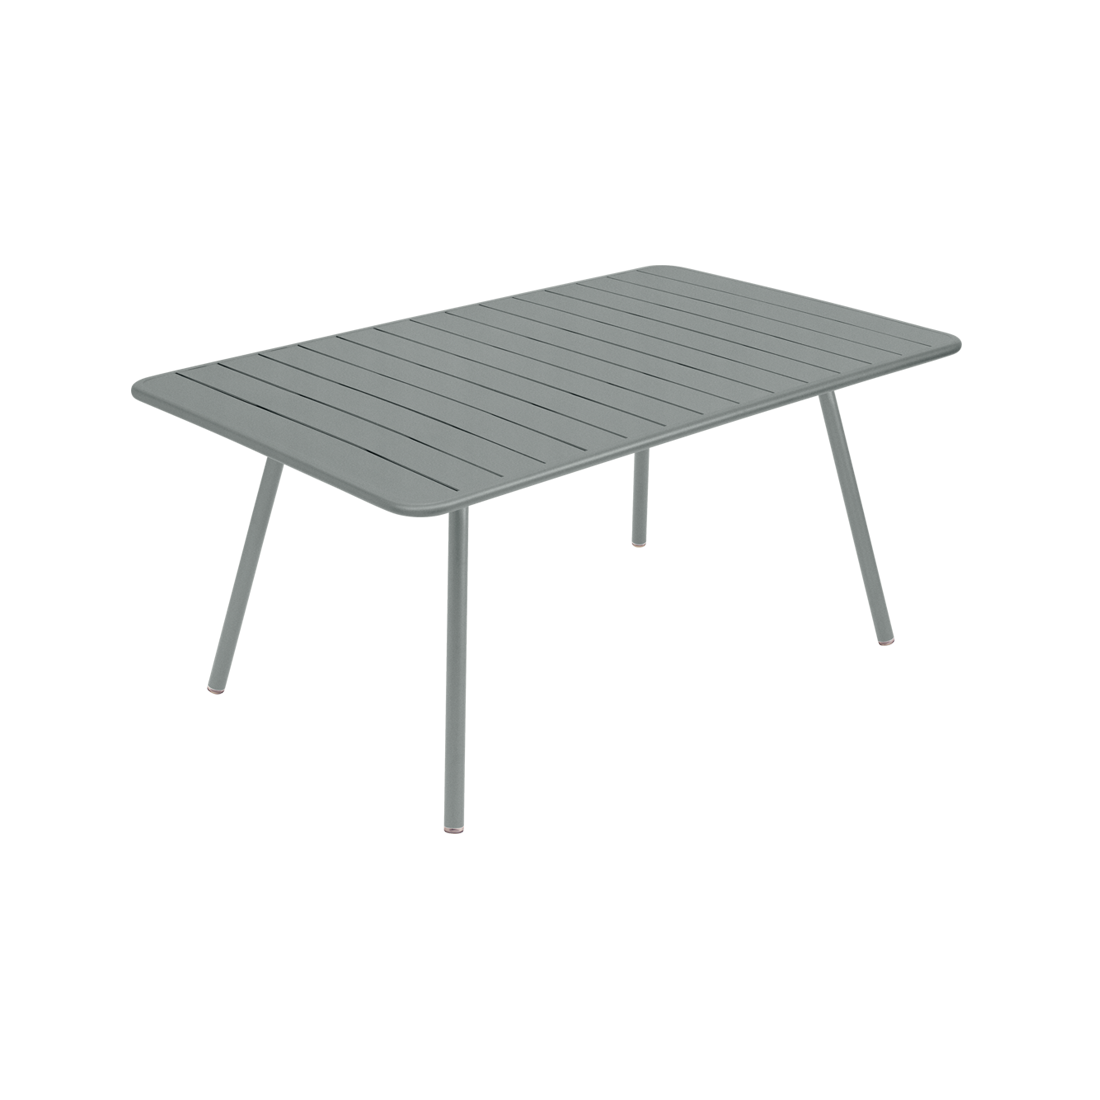 Luxembourg Table 165 x 100